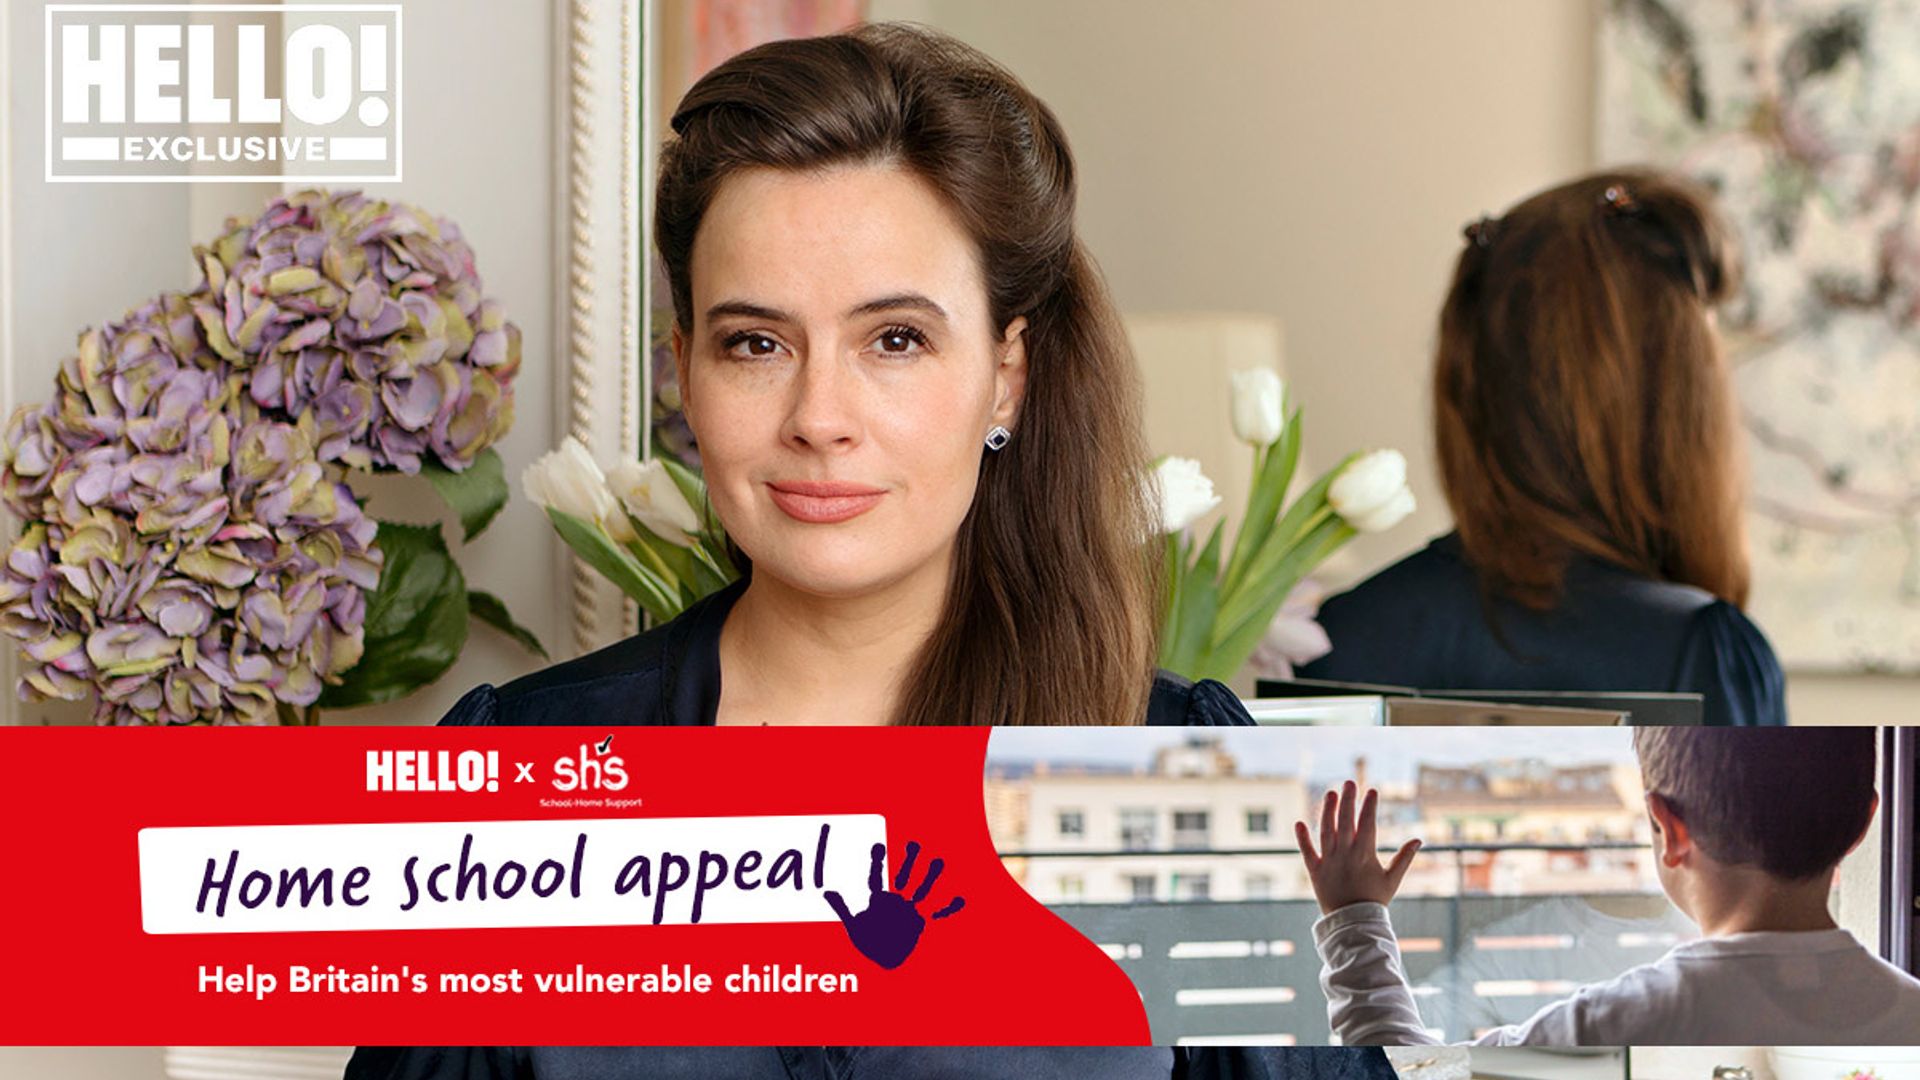 Thousands raised for HELLO! and Lady Frederick Windsor's home school appeal